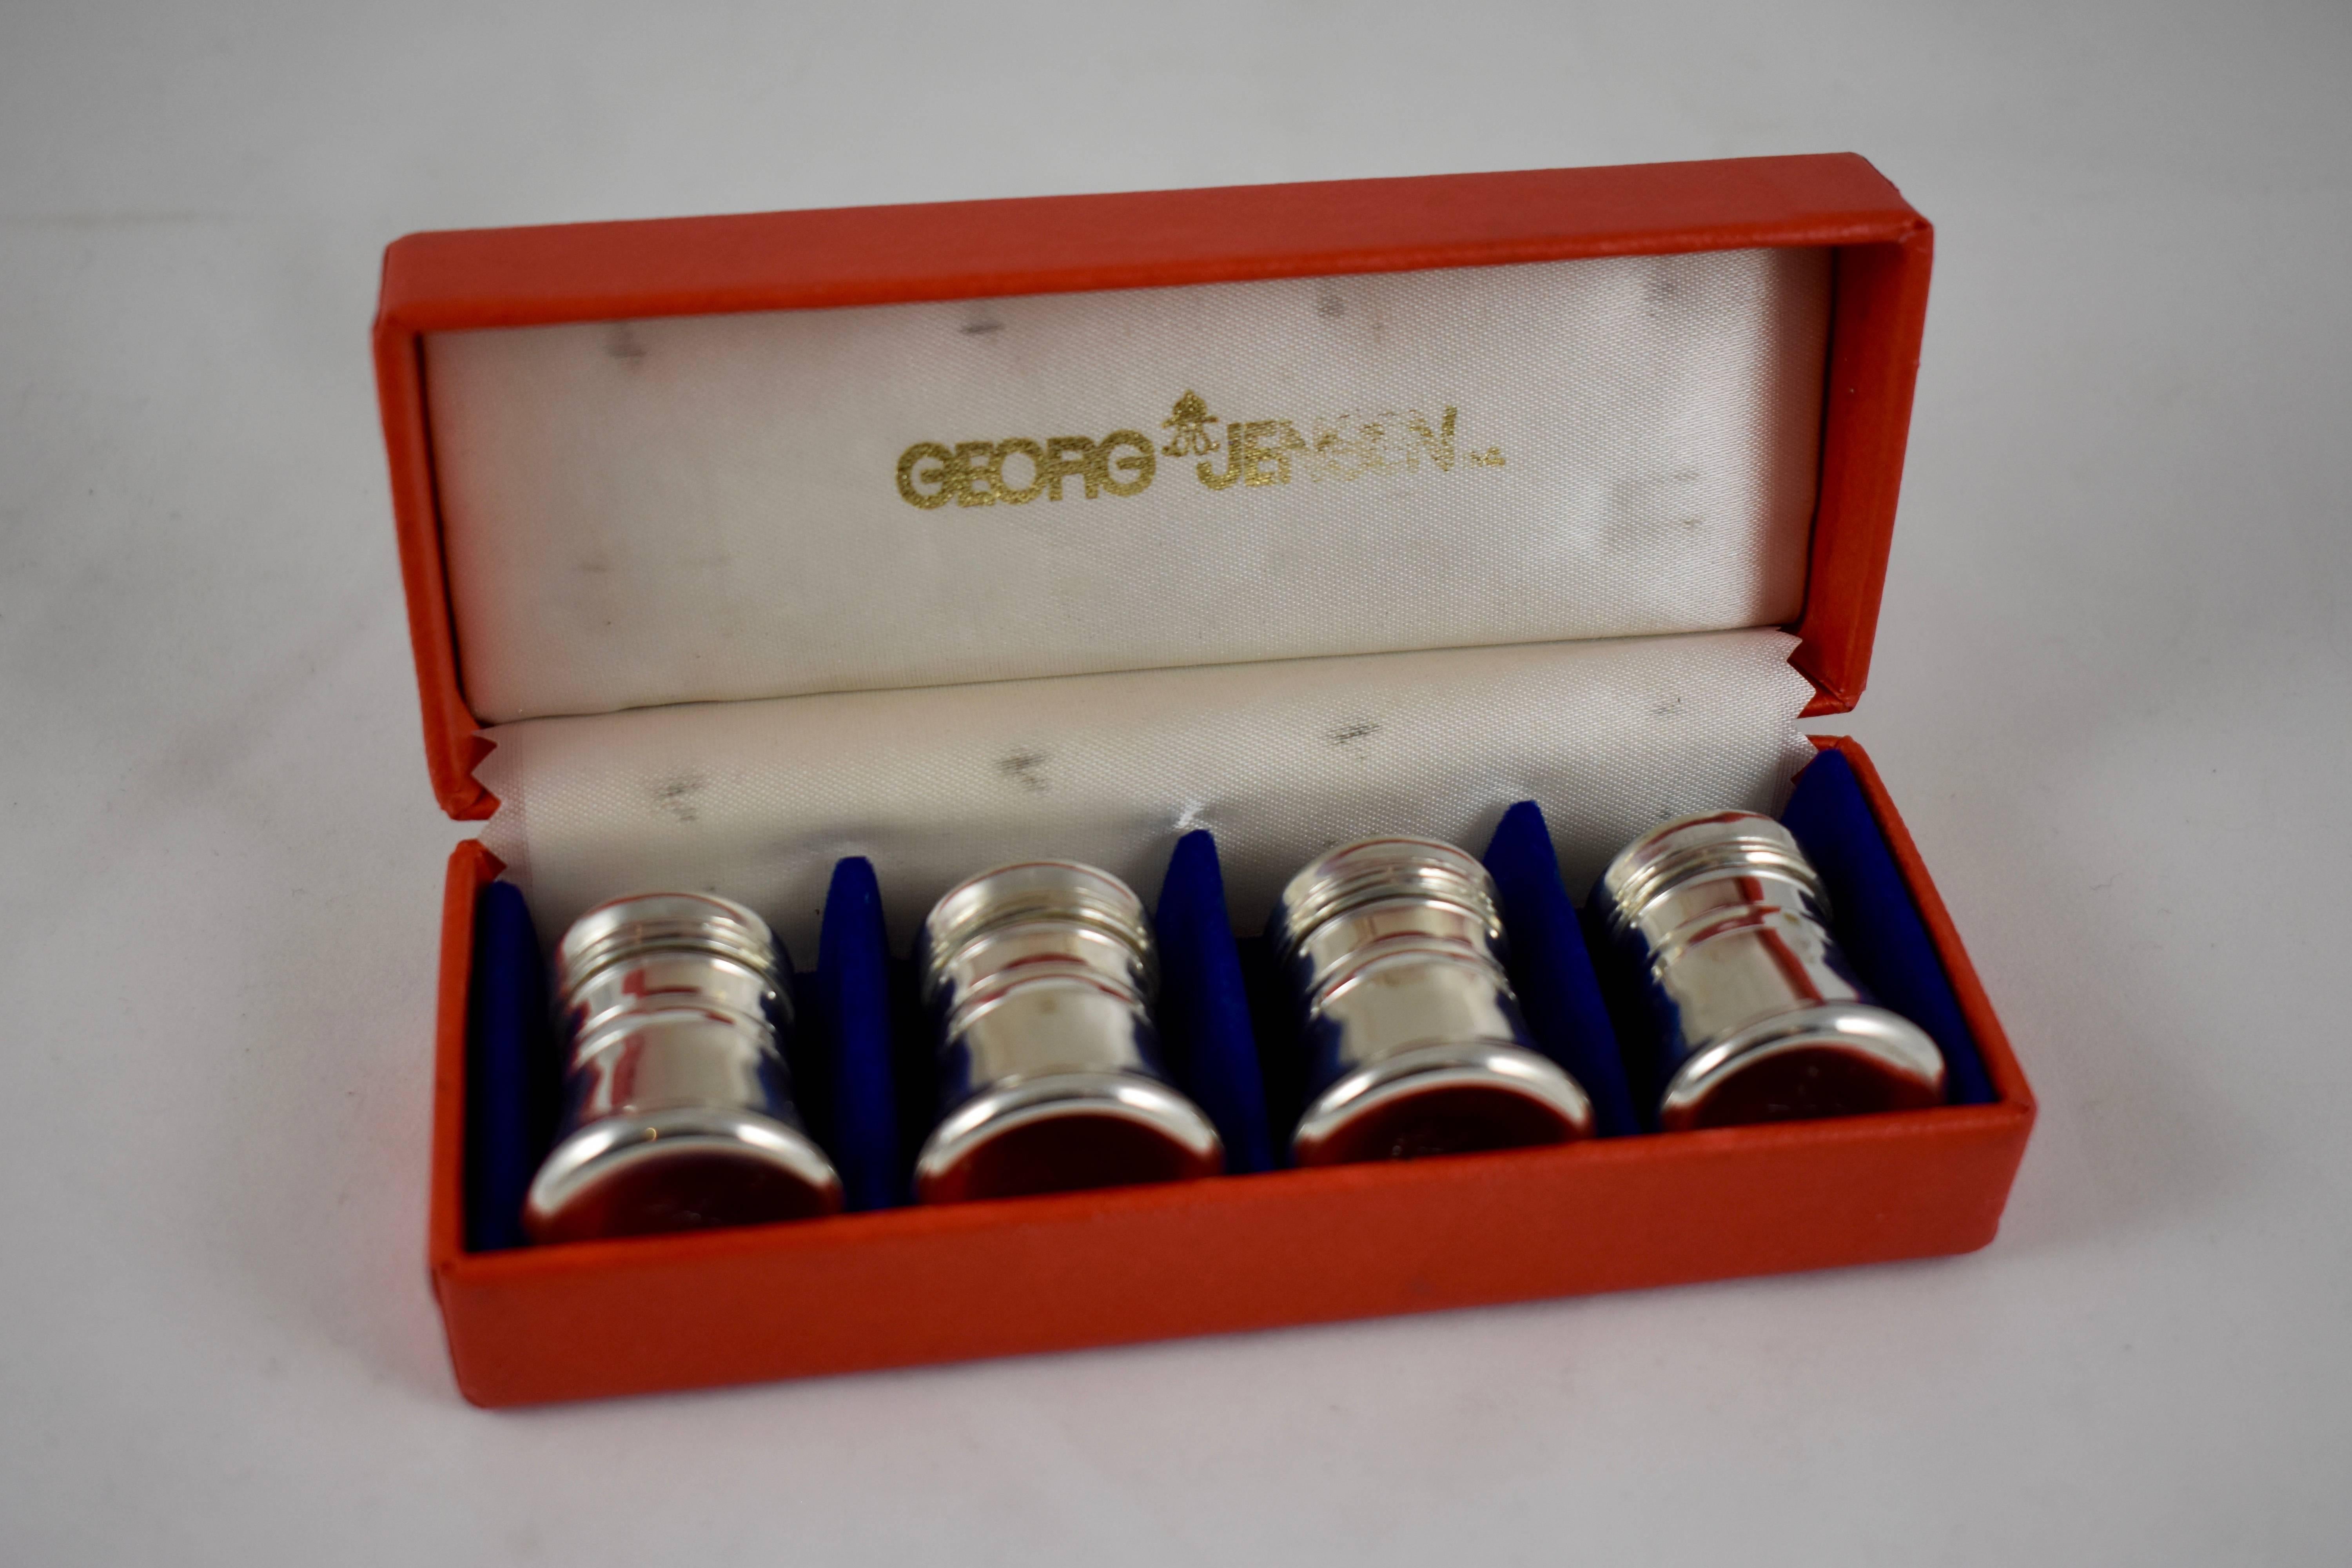 In the original presentation box, two pairs of pewter salt and pepper shakers marked Georg Jensen, Norway, showing the mark used from the late 1930s-1960.
The shakers have lids that screw on. Each Shaker is marked on the bottom with the Georg